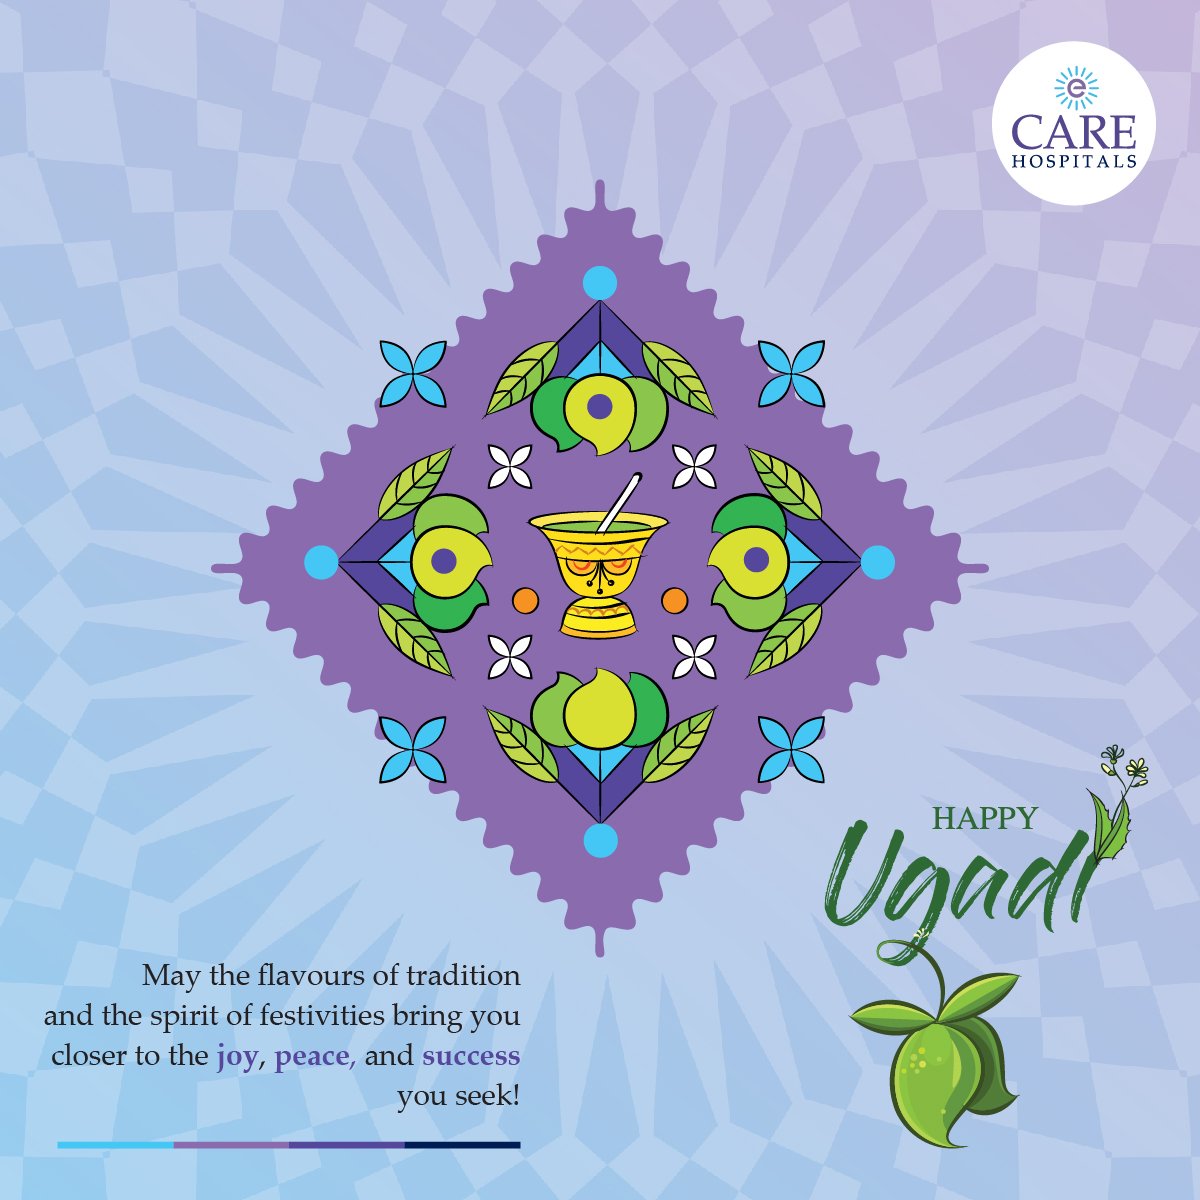 Wishing you a joyous Ugadi filled with blessings of good health, prosperity and success. May this new year mark the beginning of new successes and achievements in your life. 

#CAREHospitals #TransformingHealthcare #newyear #Ugadi #Gudipadwa #UgadiWishes #IndianFestival